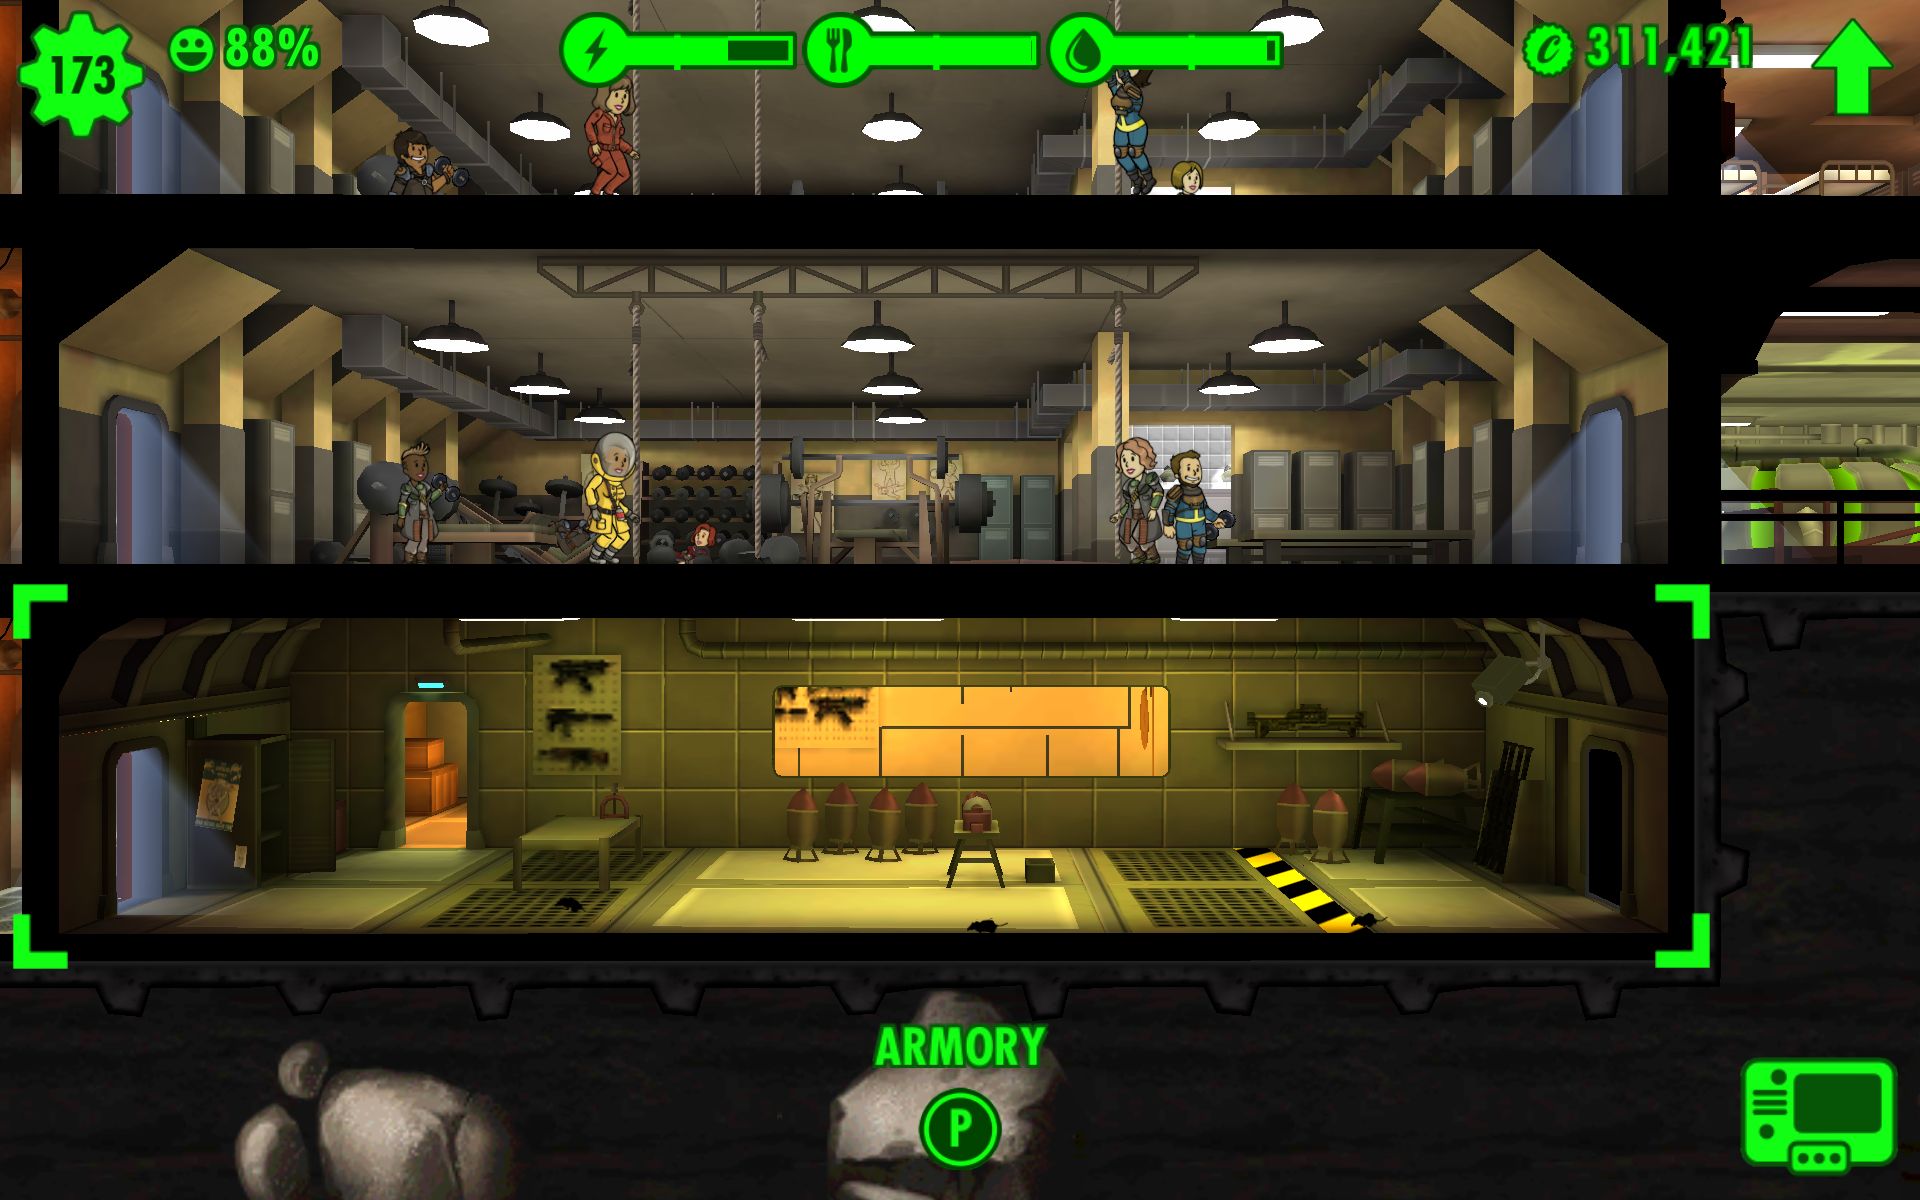 fallout shelter wiki athletics room